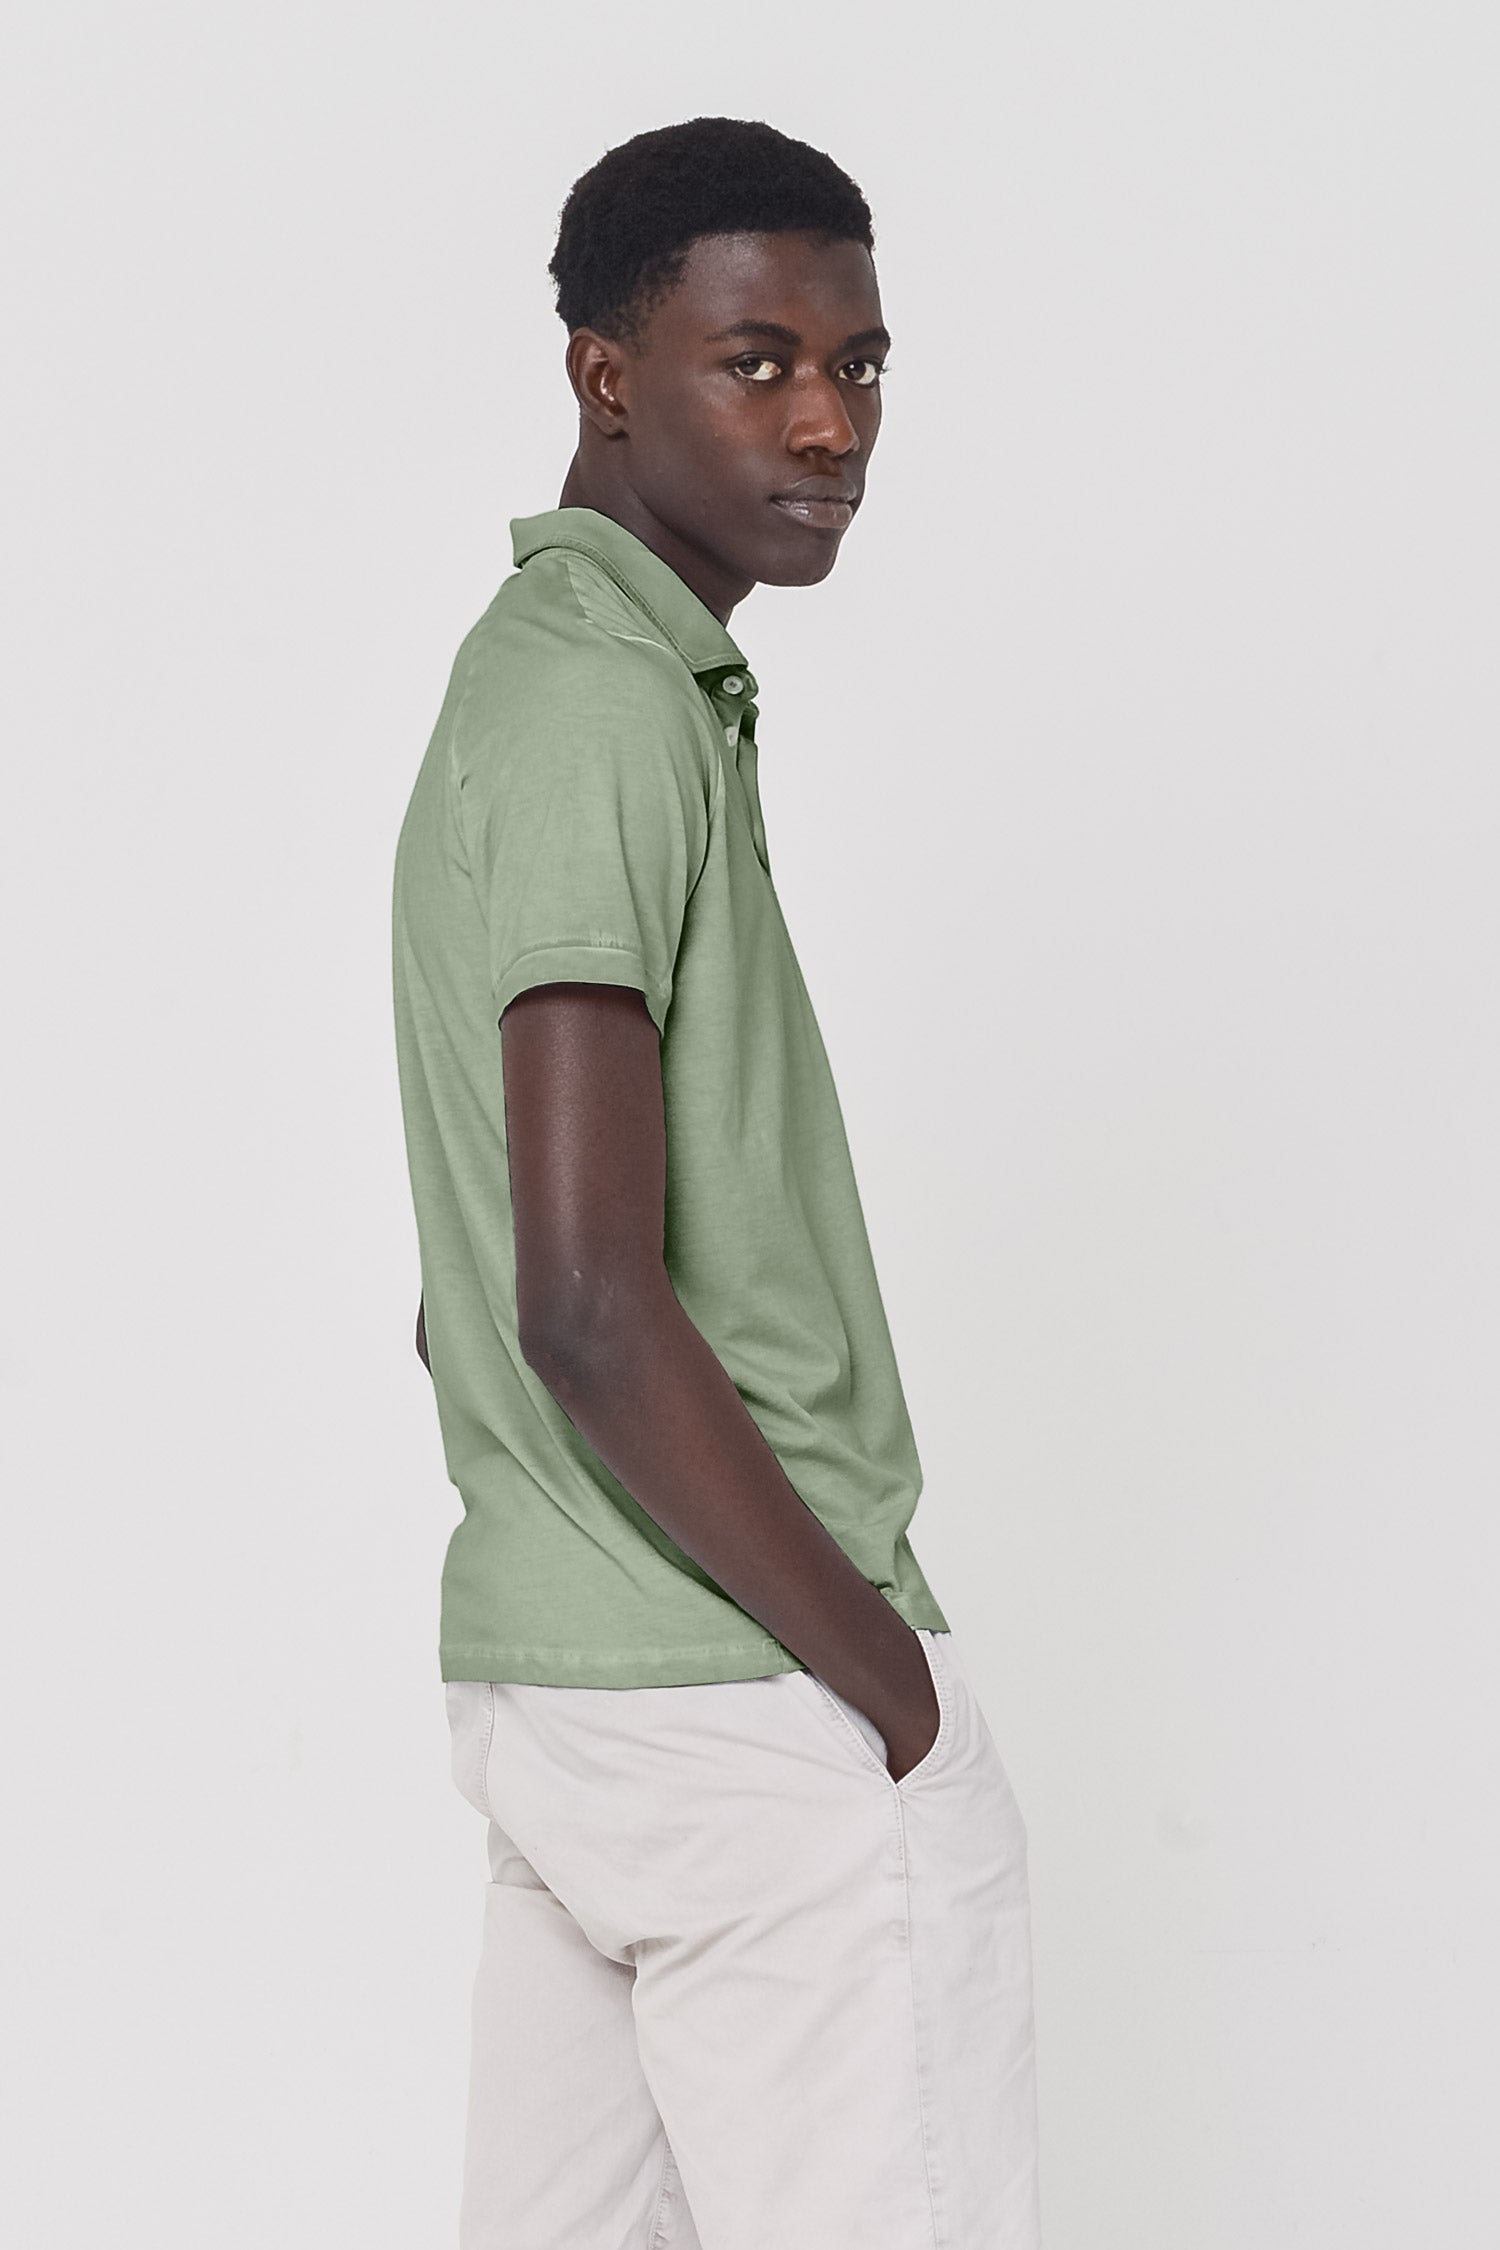 Performance Polo in Palm - Polos